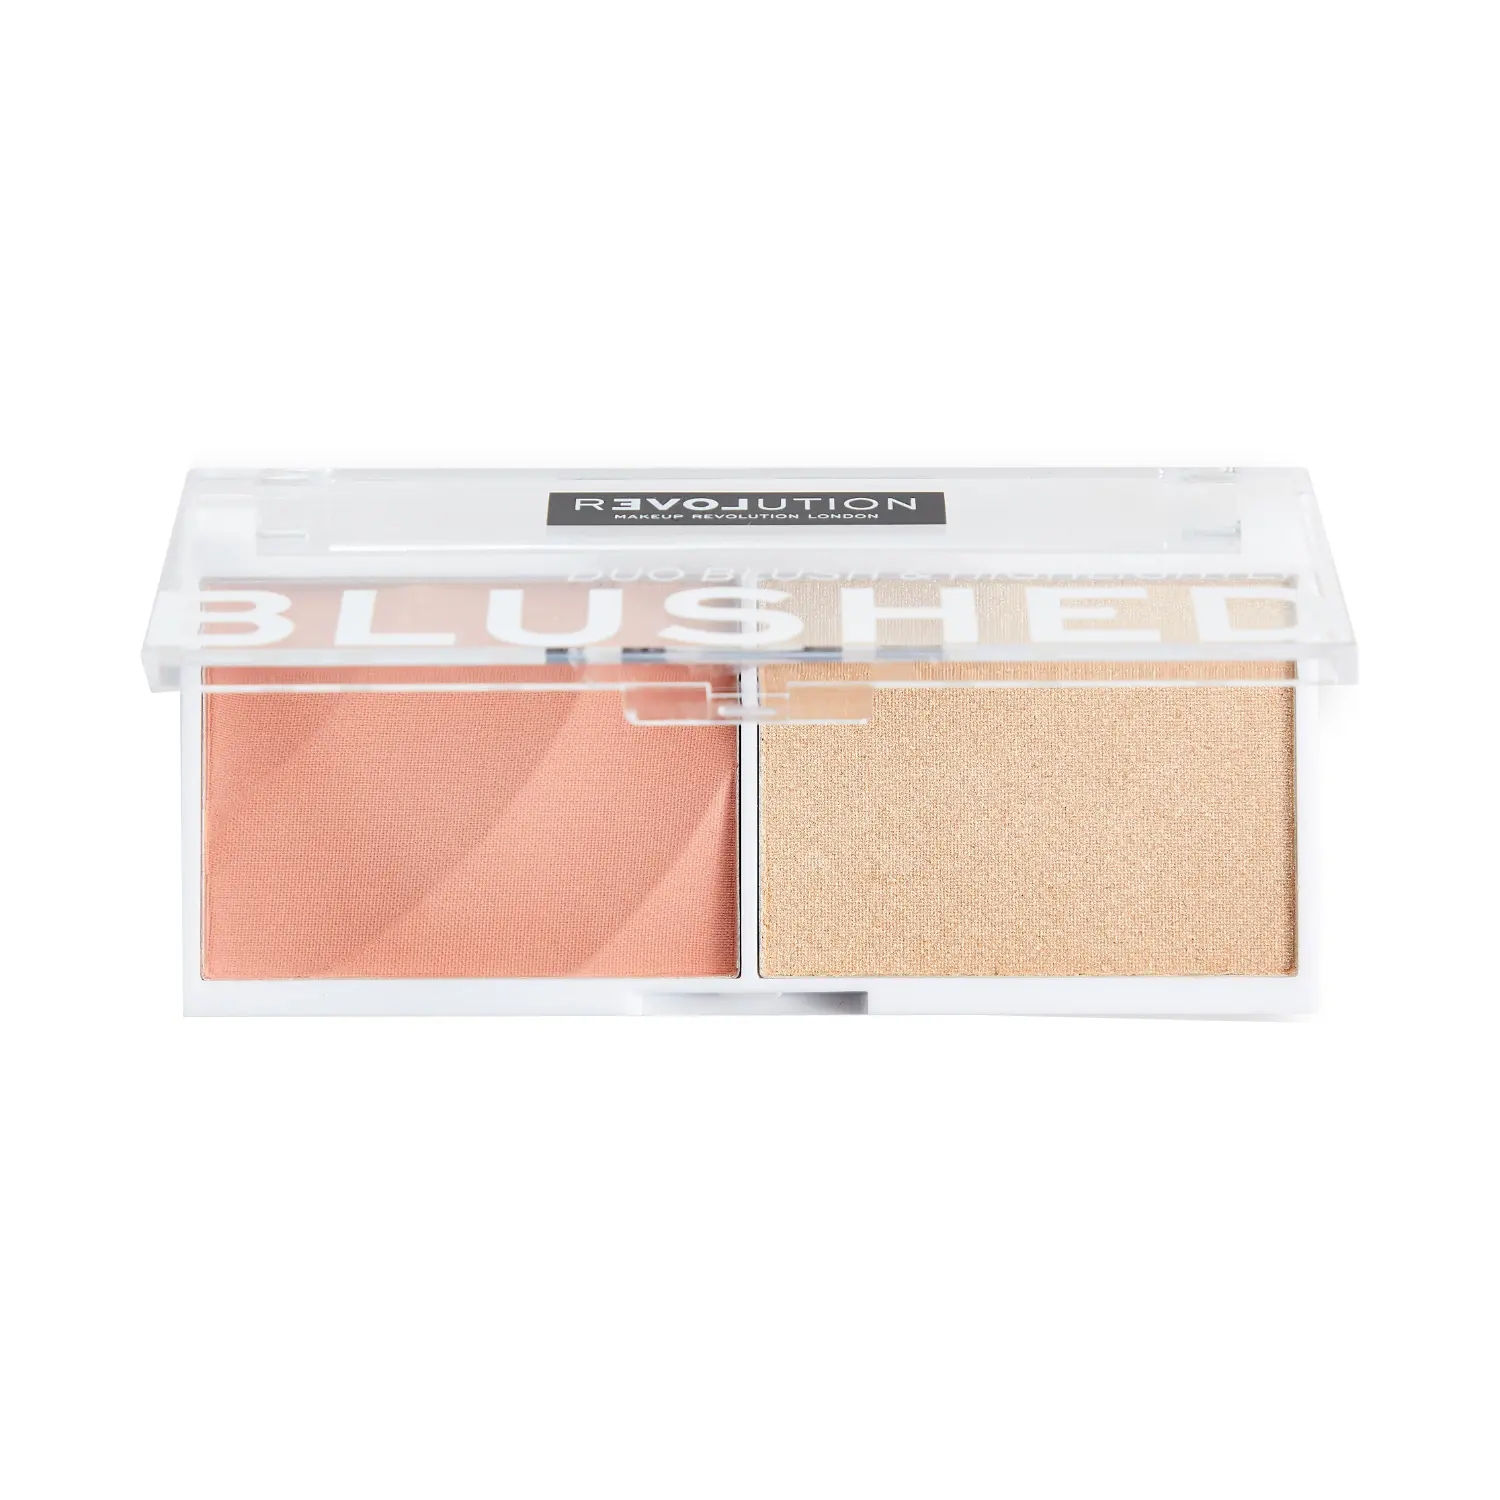 Makeup Revolution Remove Colour Play Blushed Duo Face Palette - Sweet (5.8g)